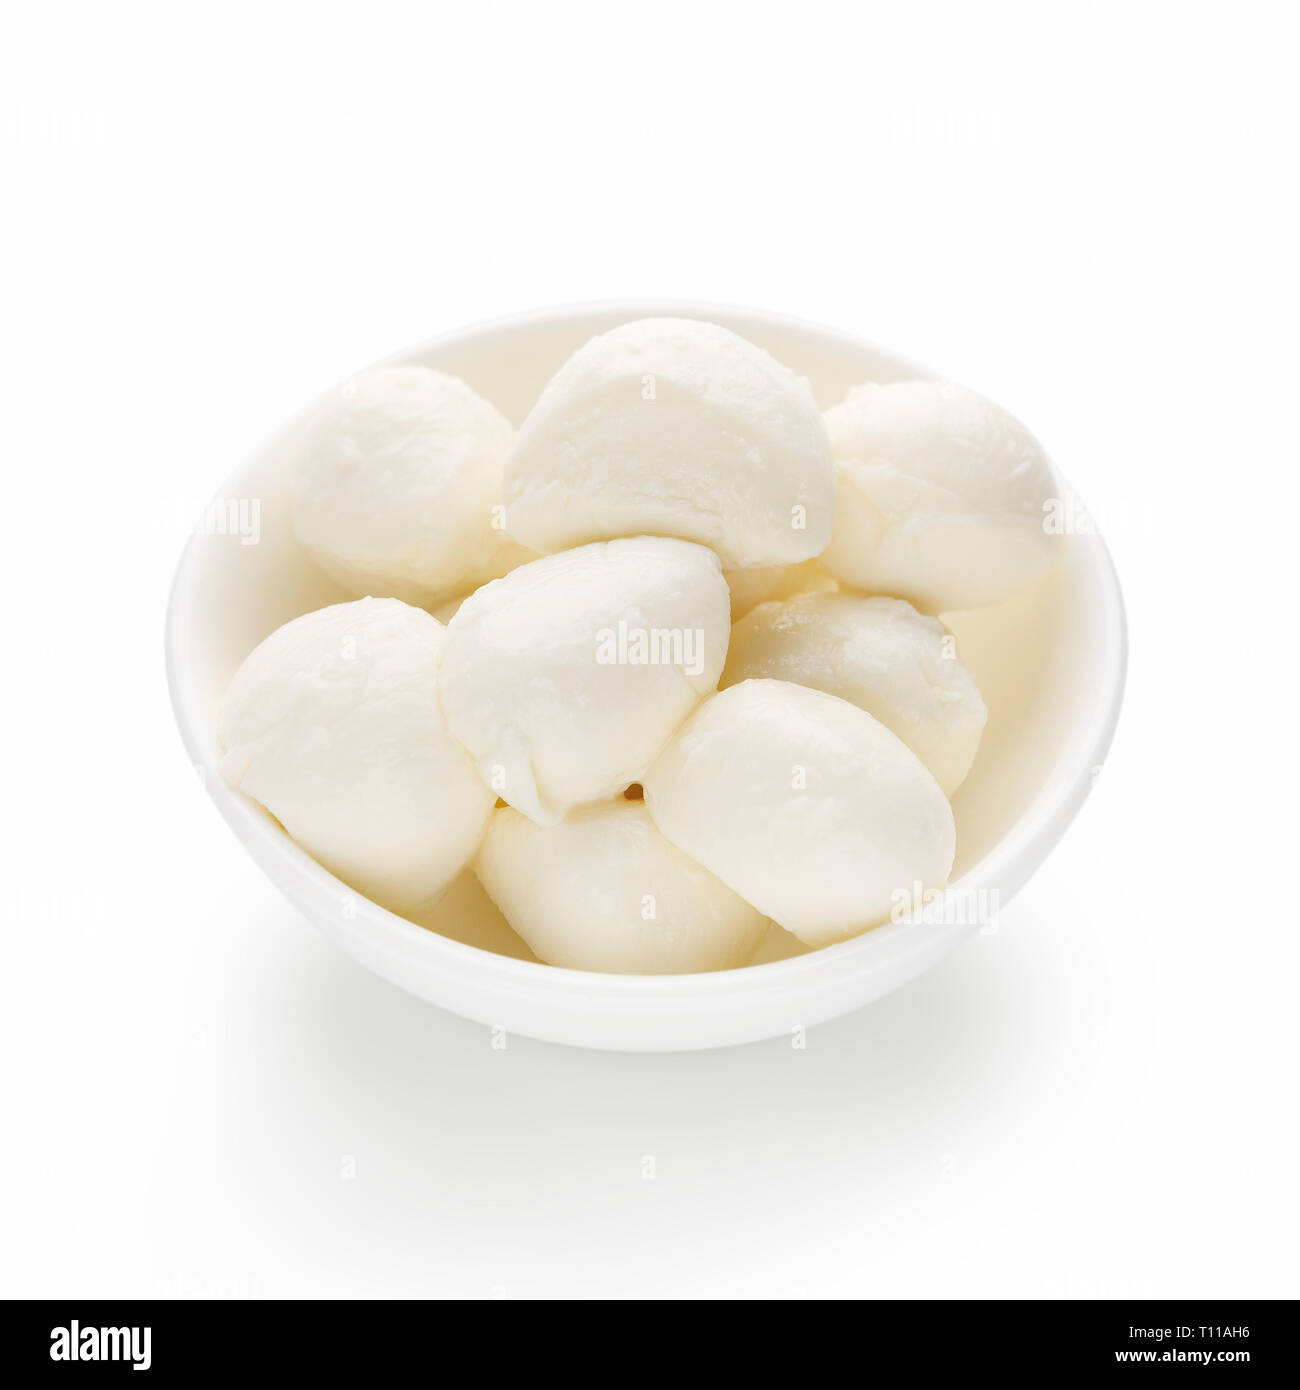 Organic dairy products concept Stock Photo